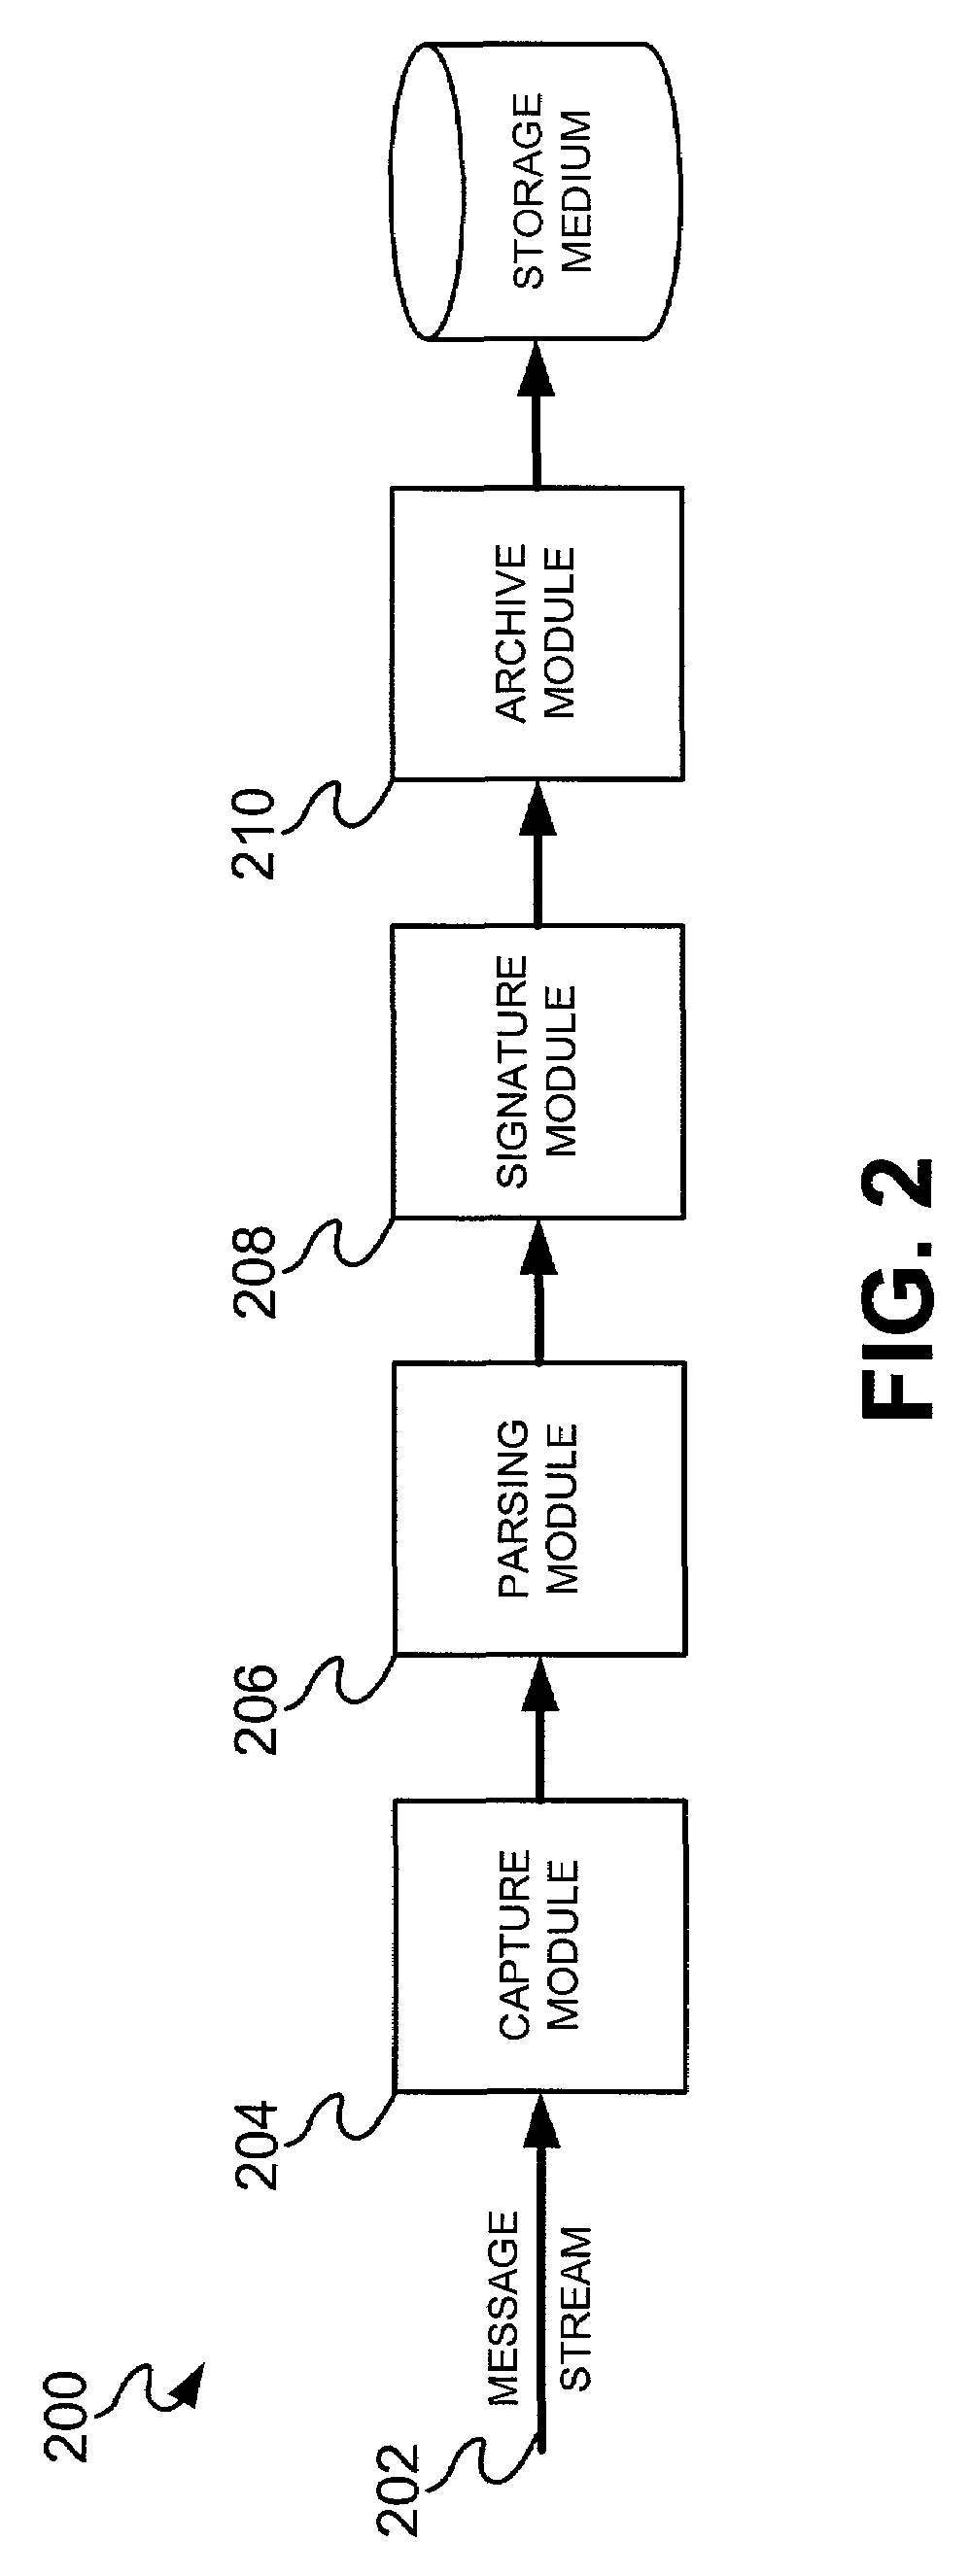 System, method and computer program product for auditing XML messages in a network-based message stream